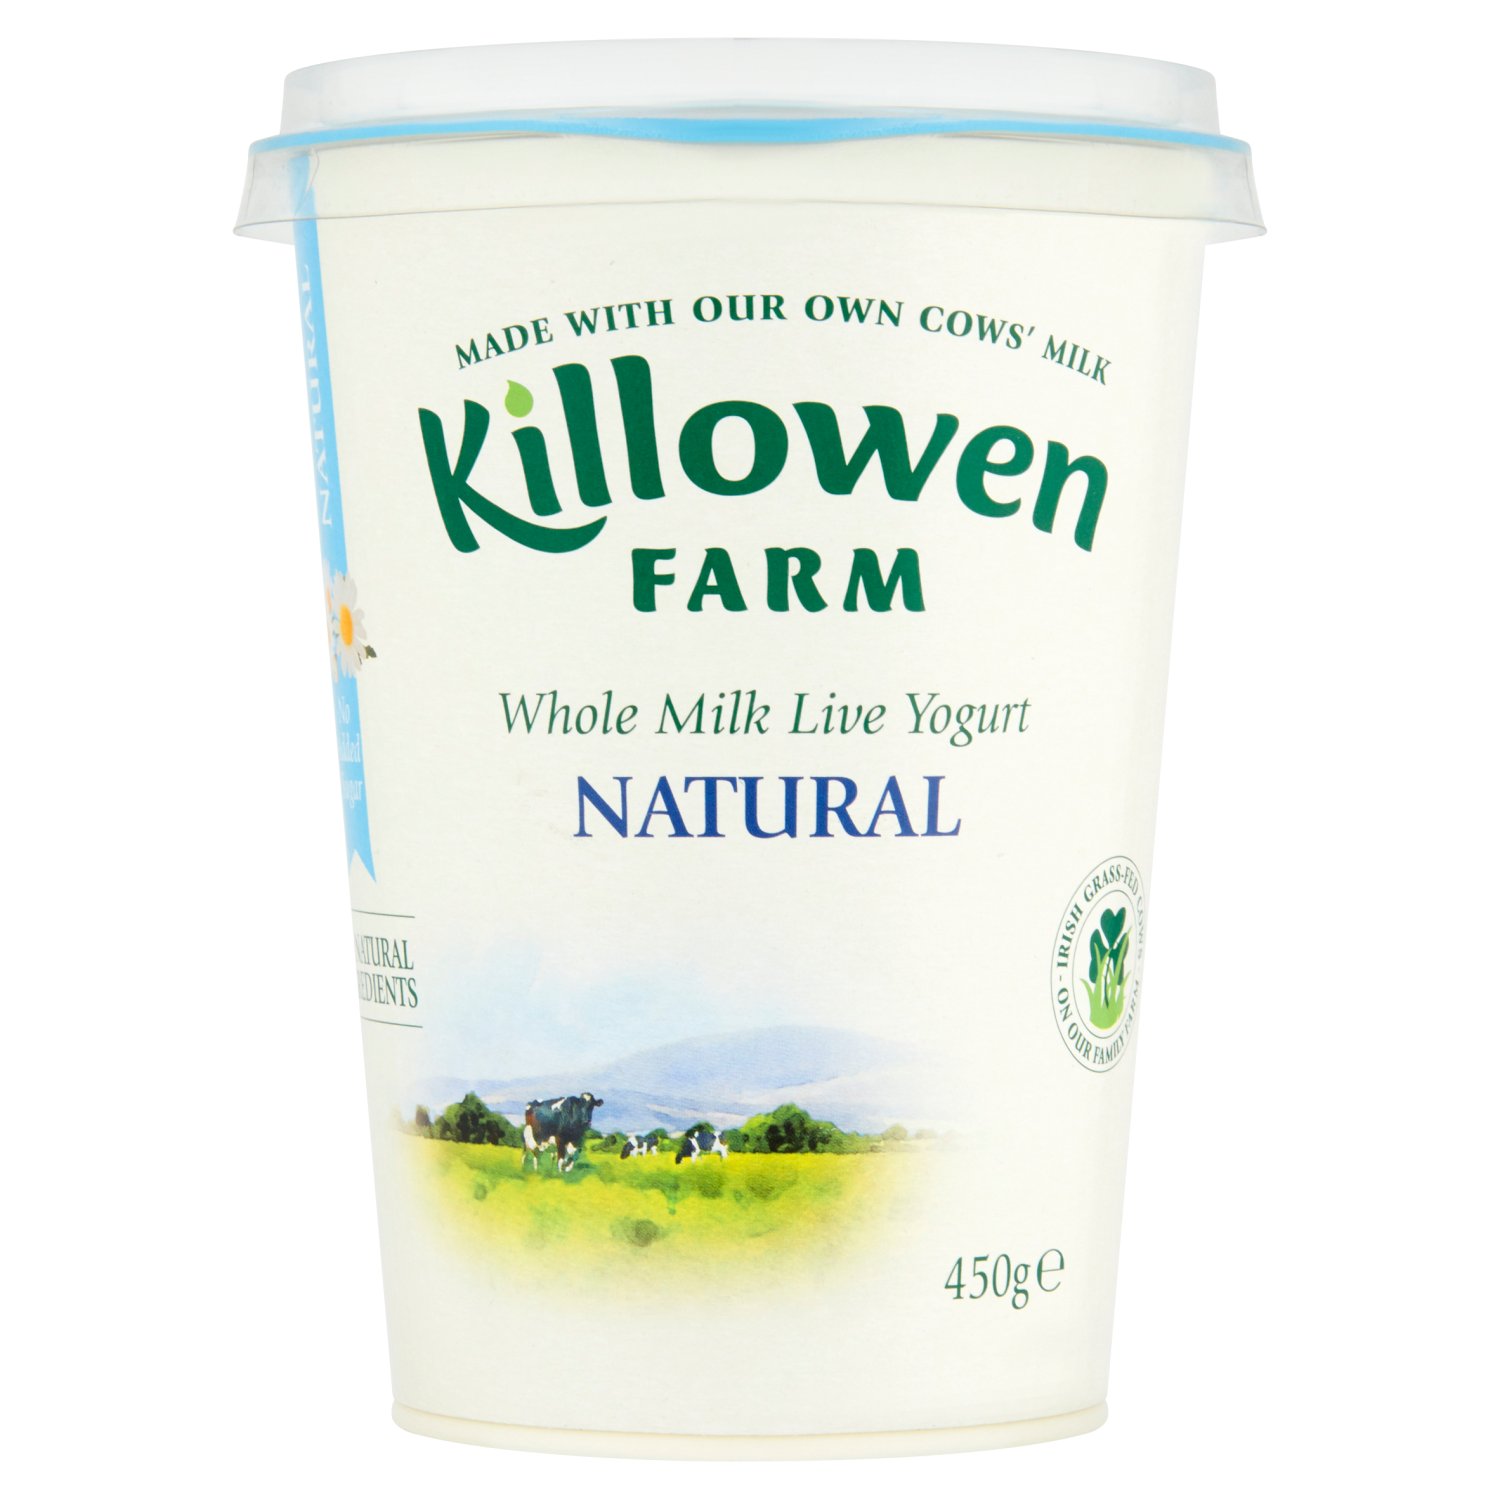 All our milk is pasteurised before being made into tasty, wholesome yogurt; safe and nutritious for all your family to enjoy.